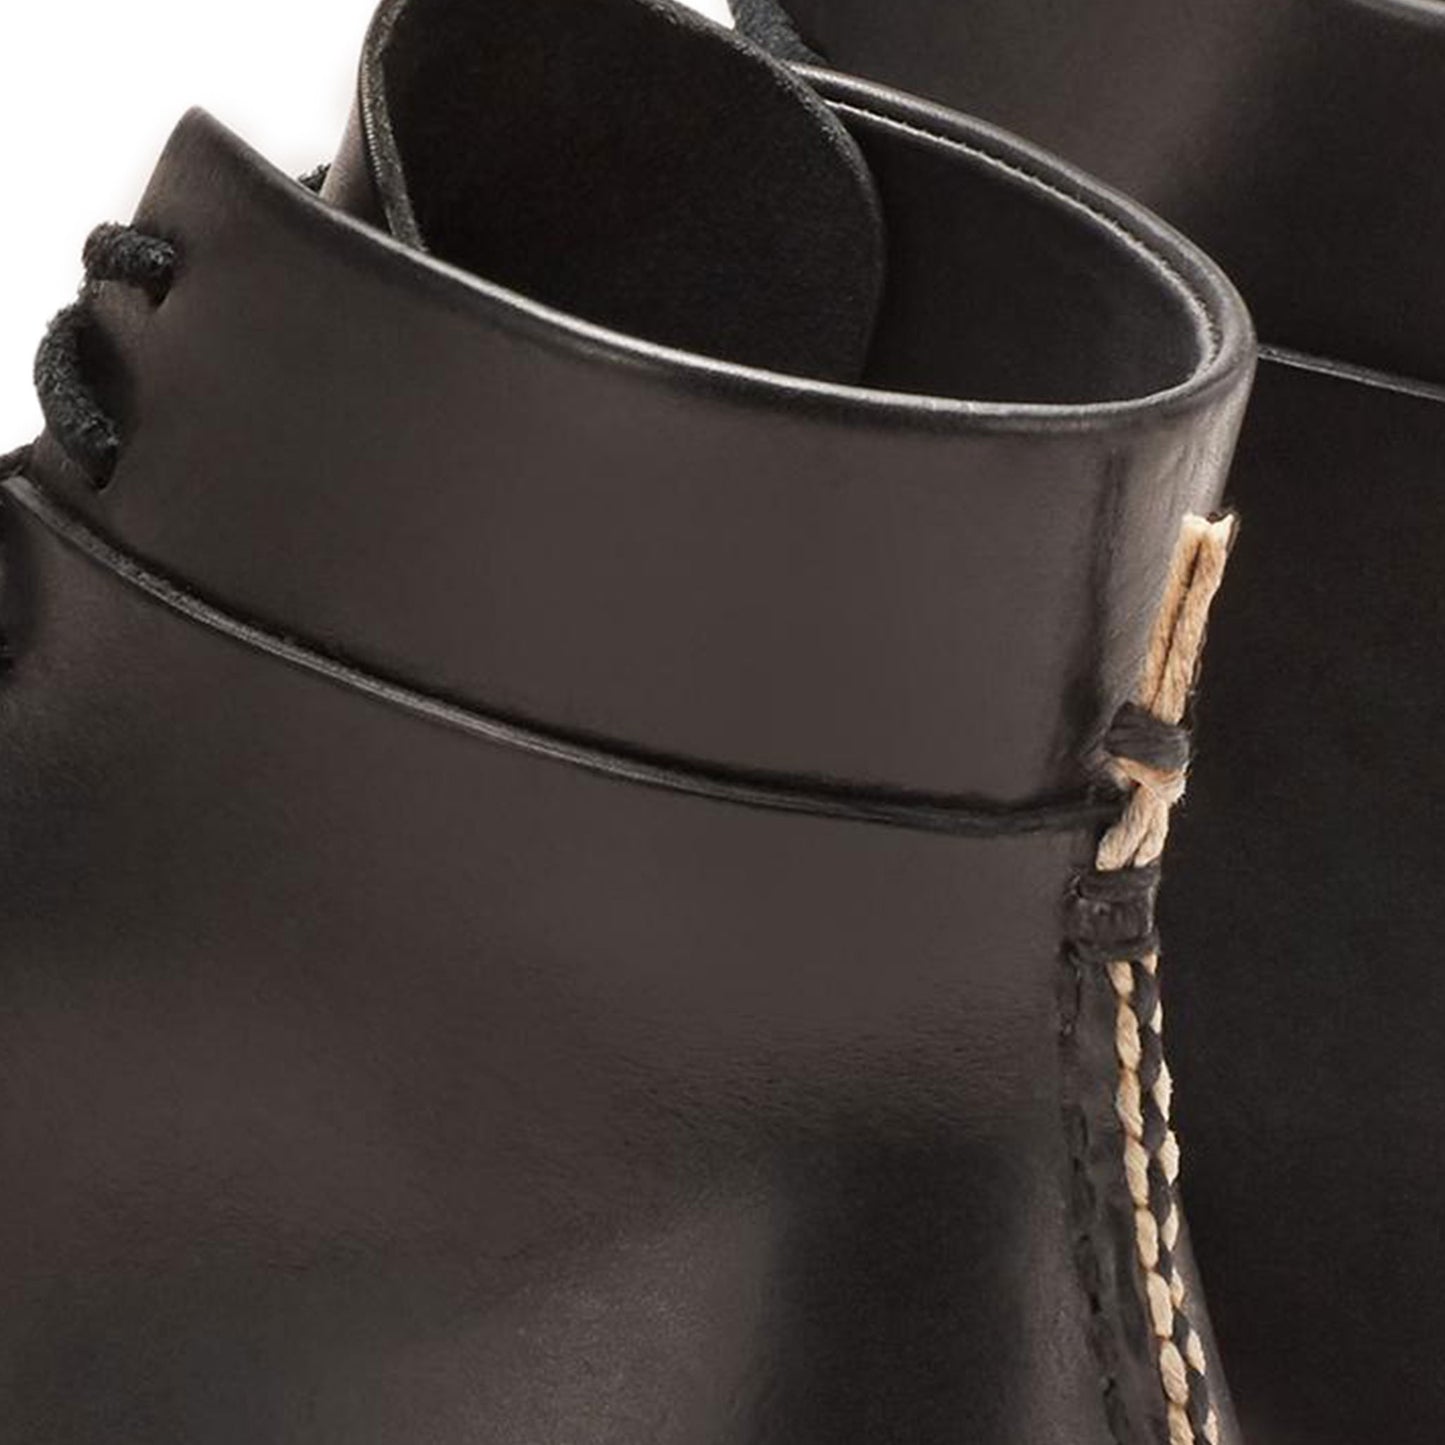 FEIT Braided Lace-Up Boots Shoes Leather Black Detail Braid